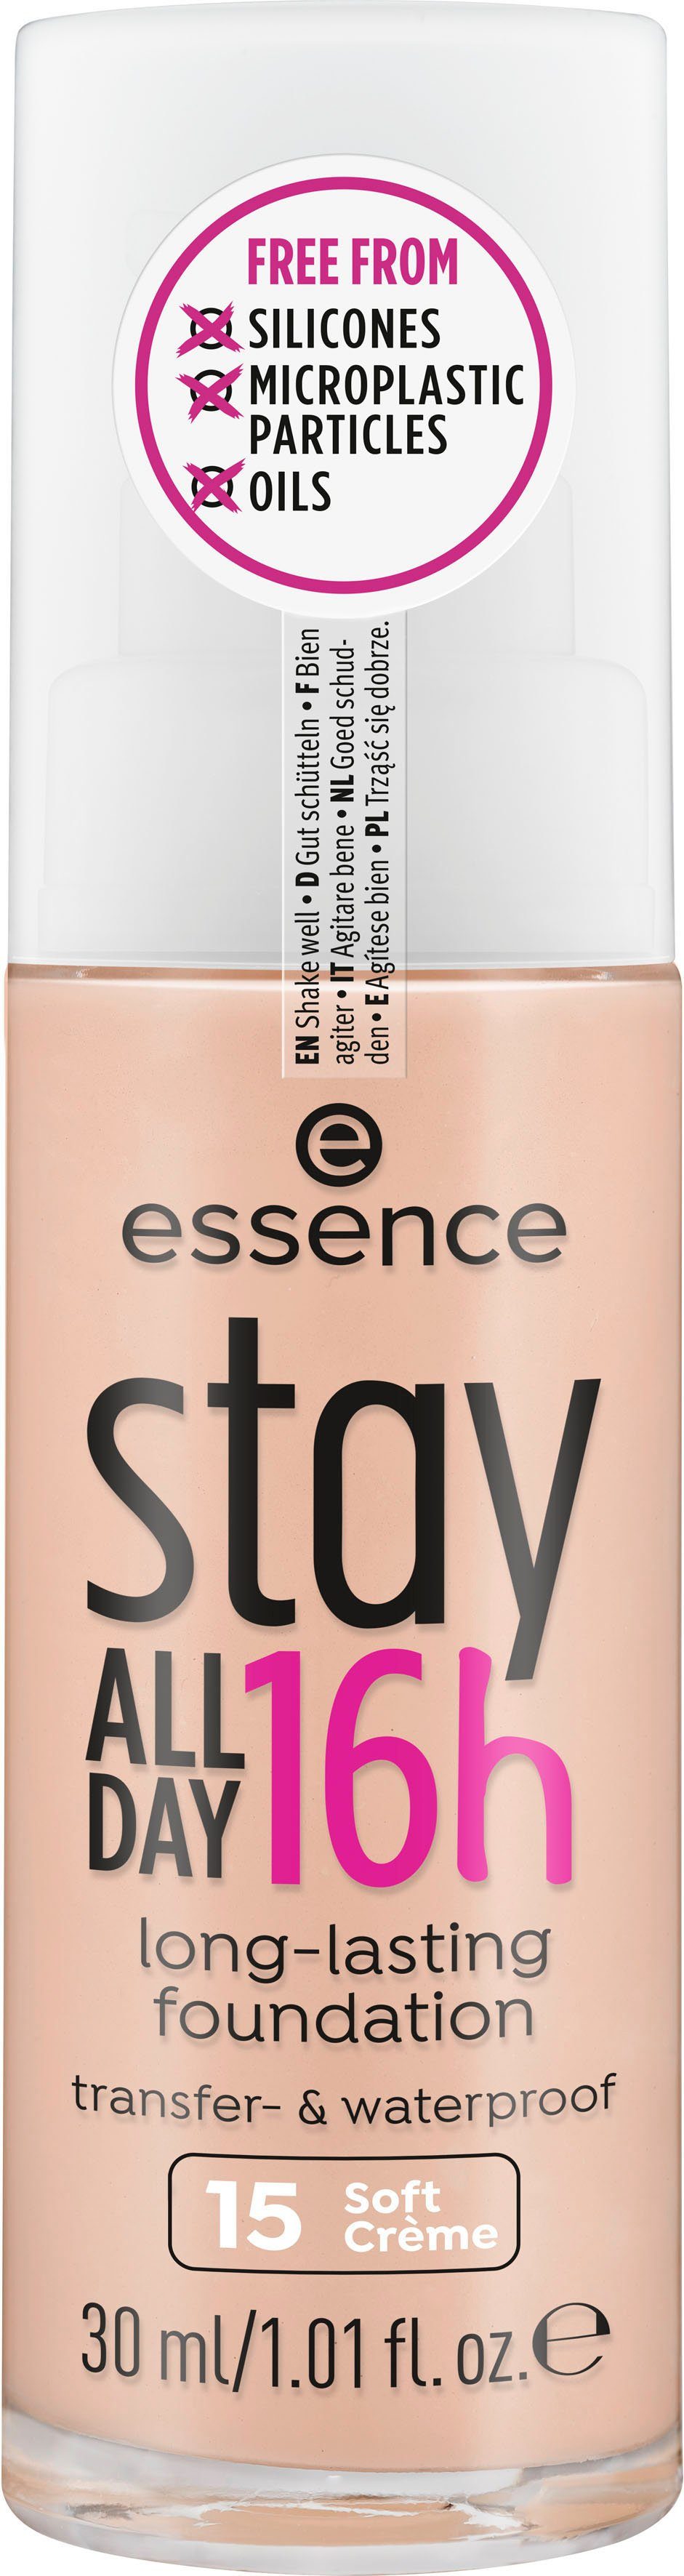 ALL long-lasting, Essence Foundation Soft 3-tlg. 16h DAY Creme stay